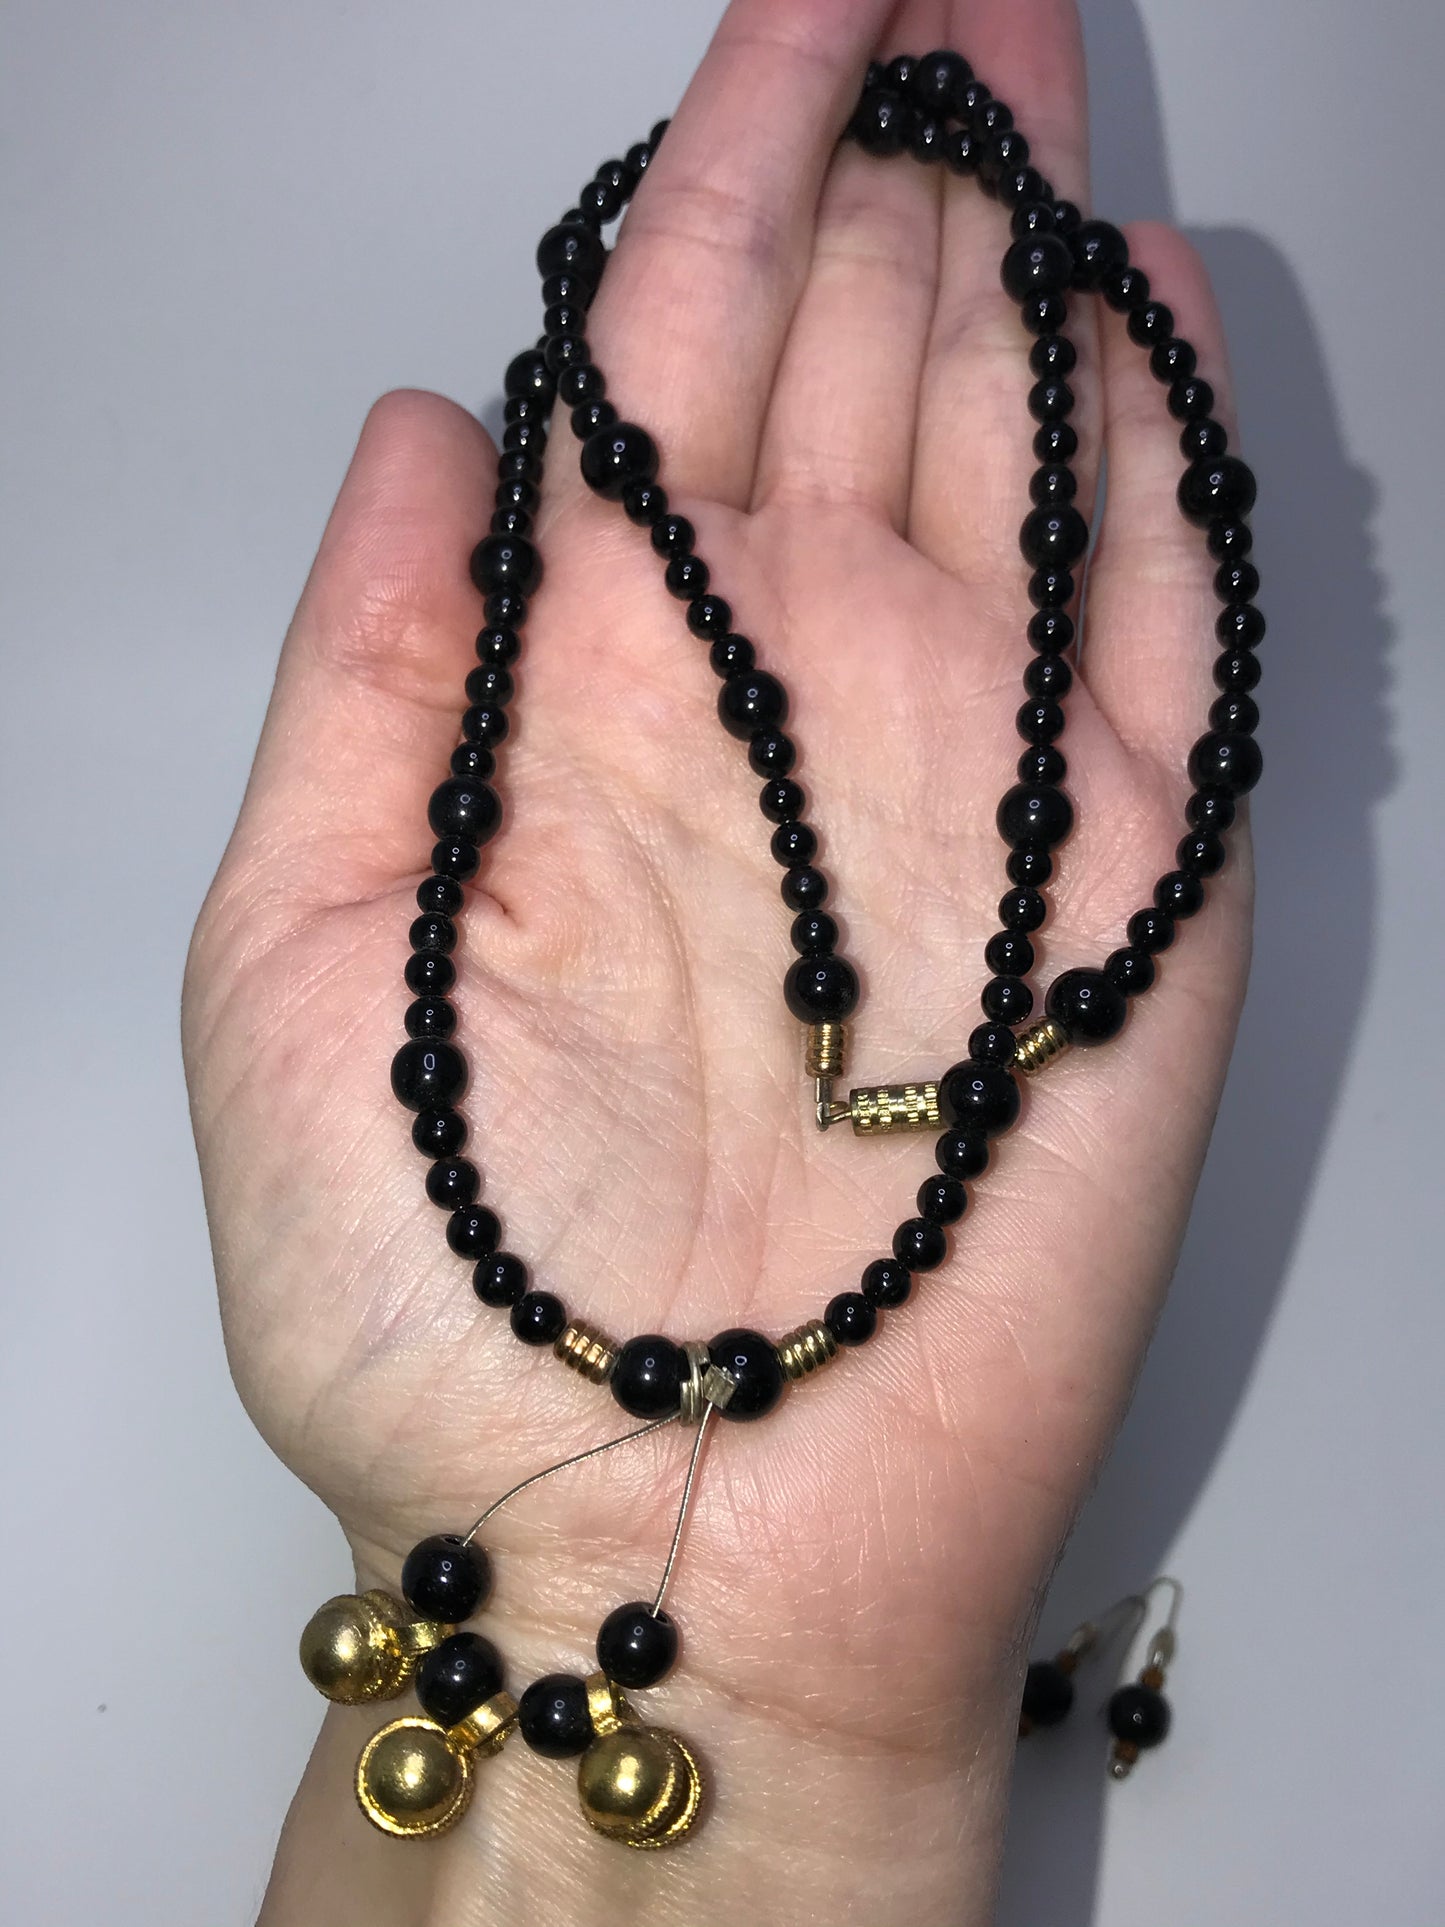 22" Long Onyx And Obsidian Beaded Necklace Set